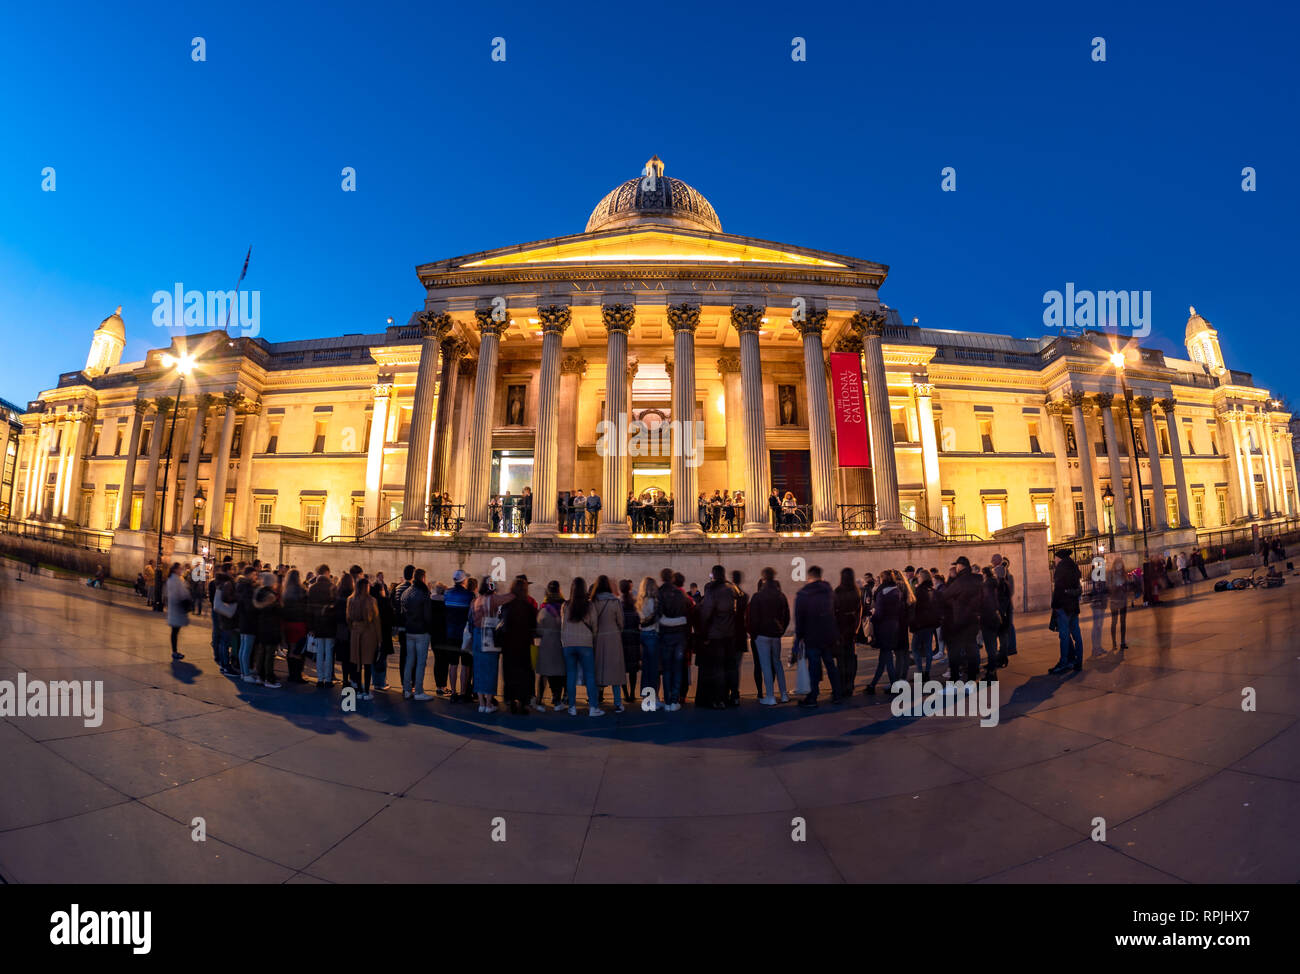 London, England, UK - February 15, 2019: Group of tourists watching a show in front of National Gallery of Art and Culture in Trafalgar Square in even Stock Photo